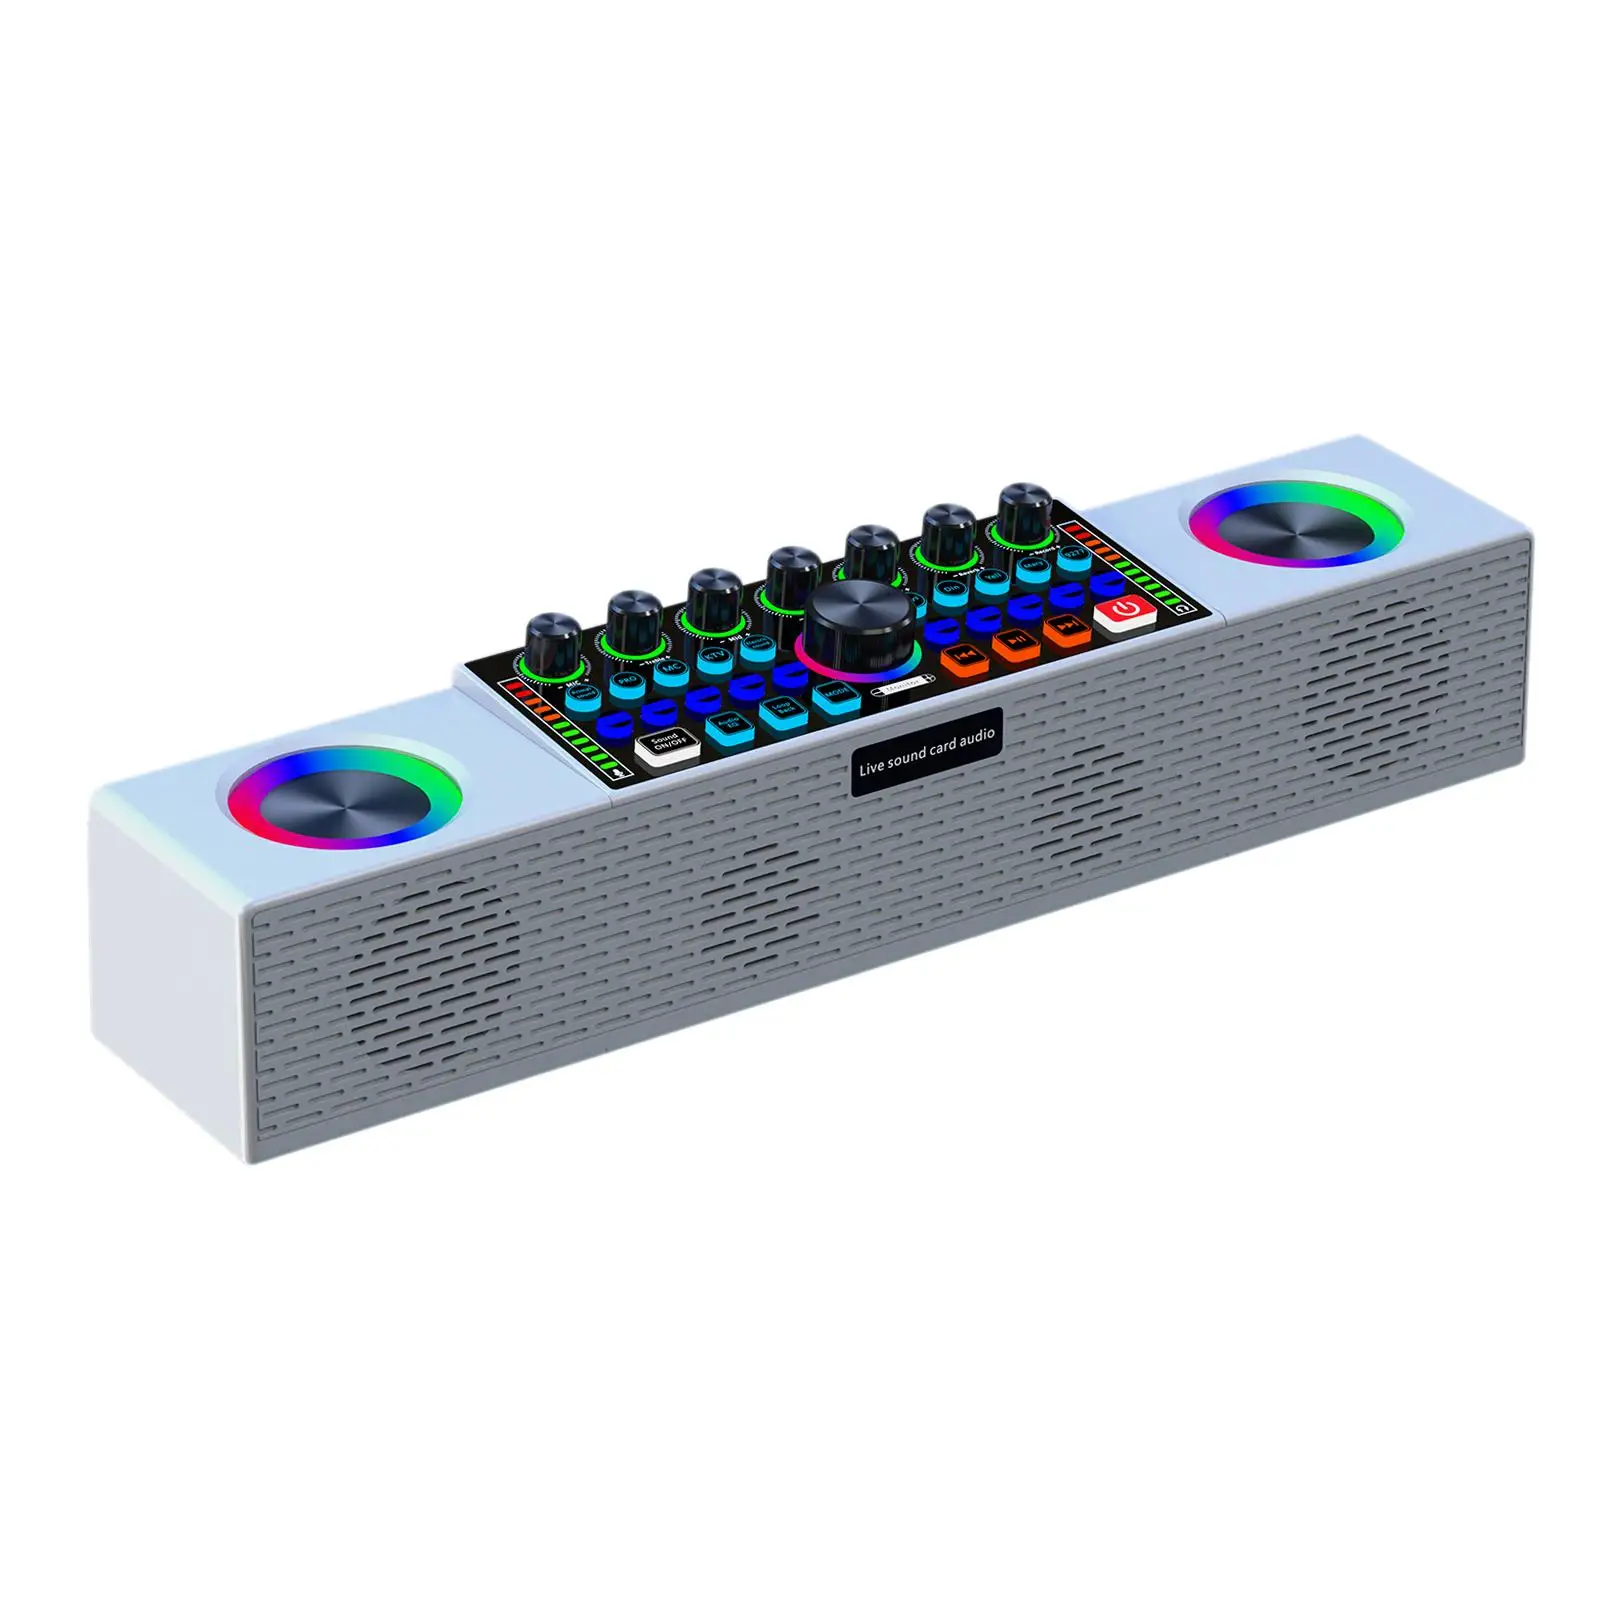 Live Sound Card Radio Professional with DJ Mixer Effects Universal External Audio Mixer for Gaming Singing KTV Music PC Phone